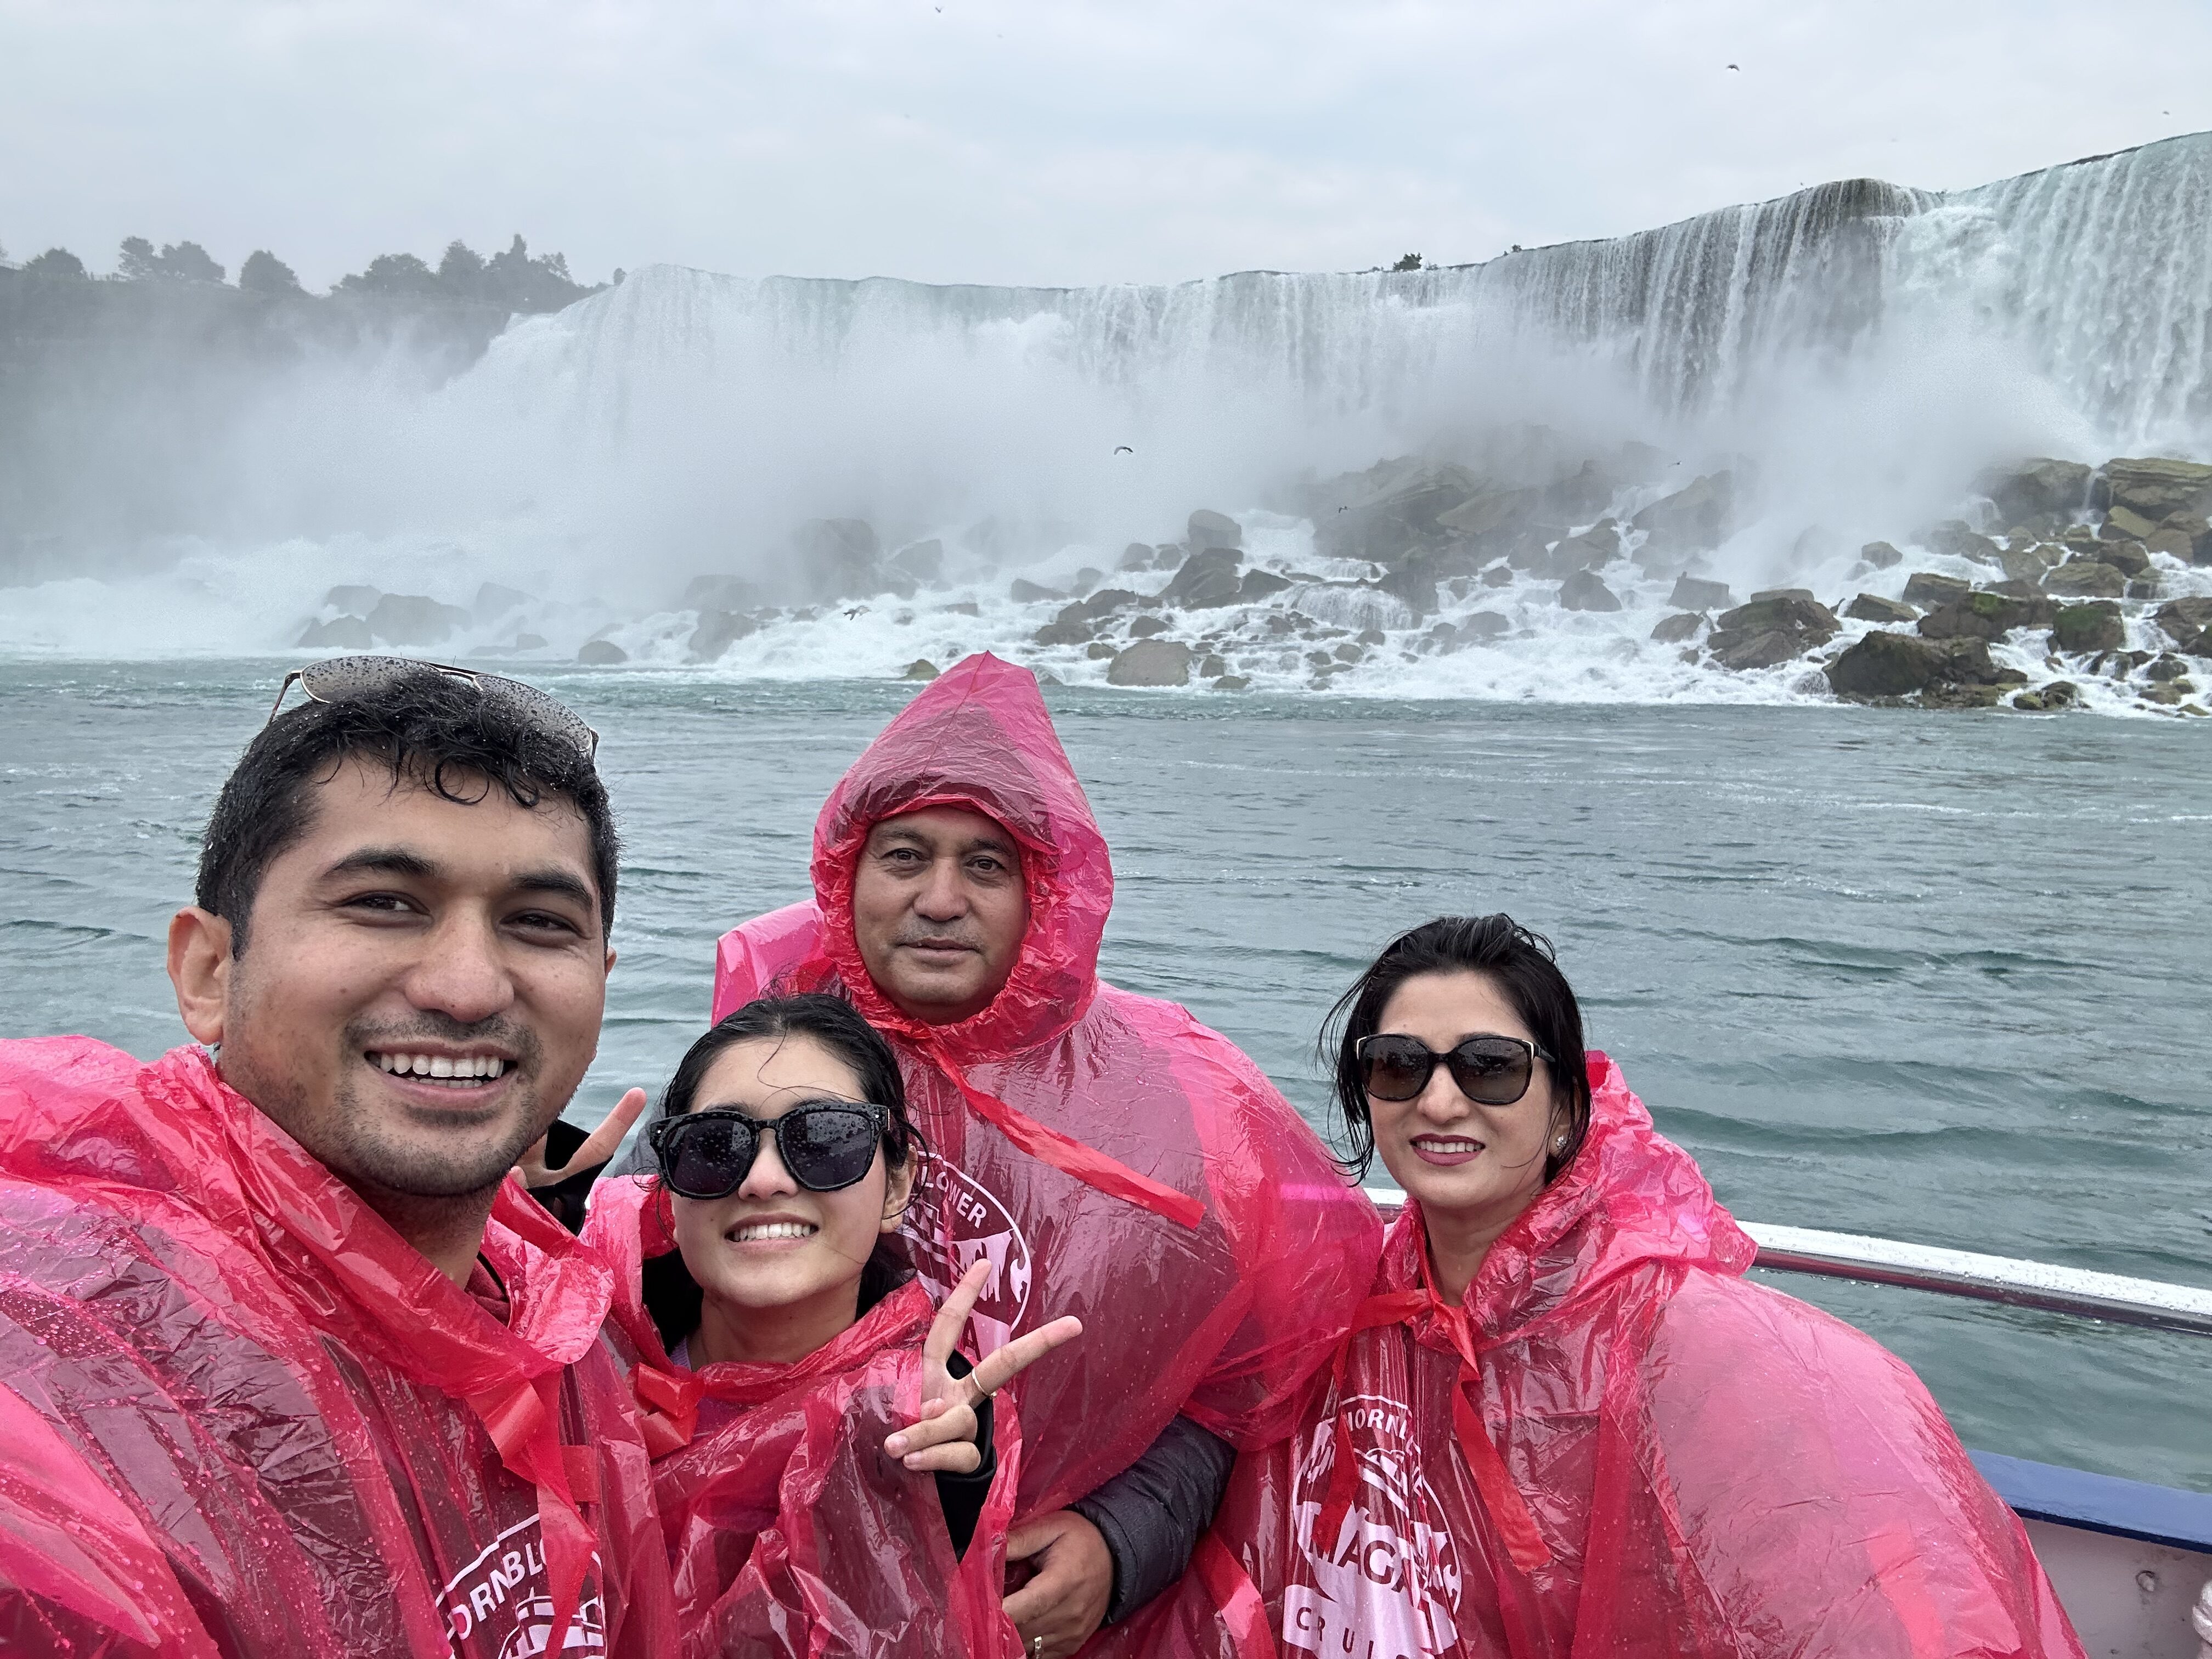 Asmina stands smiling with some family members in front of Niagara Falls.